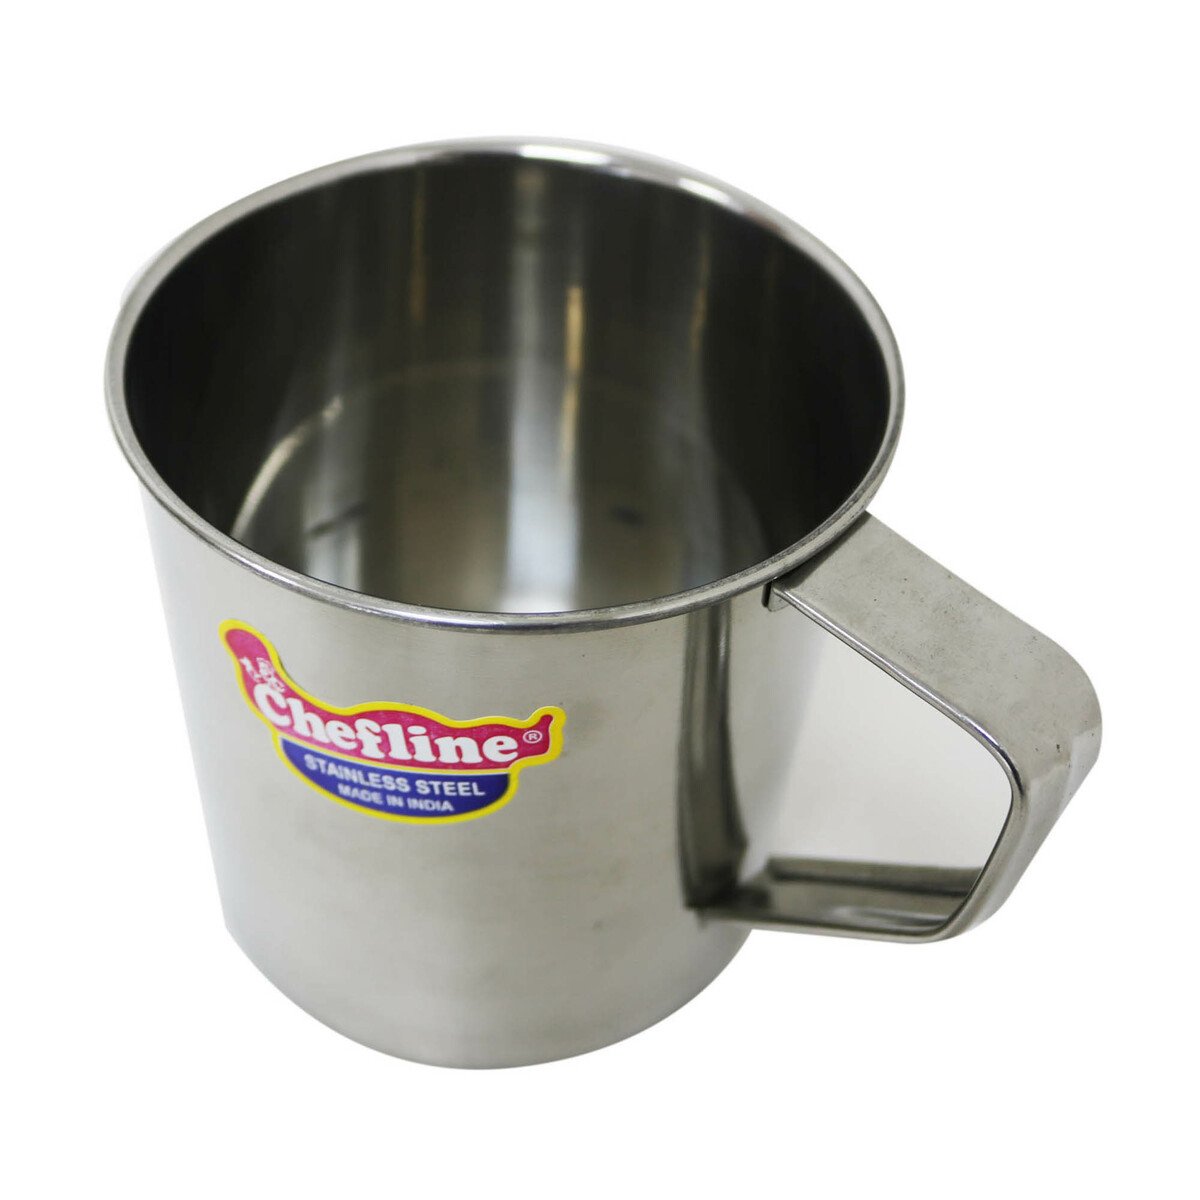 Chefline Stainless Steel Deluxe Mug No.4 Ind